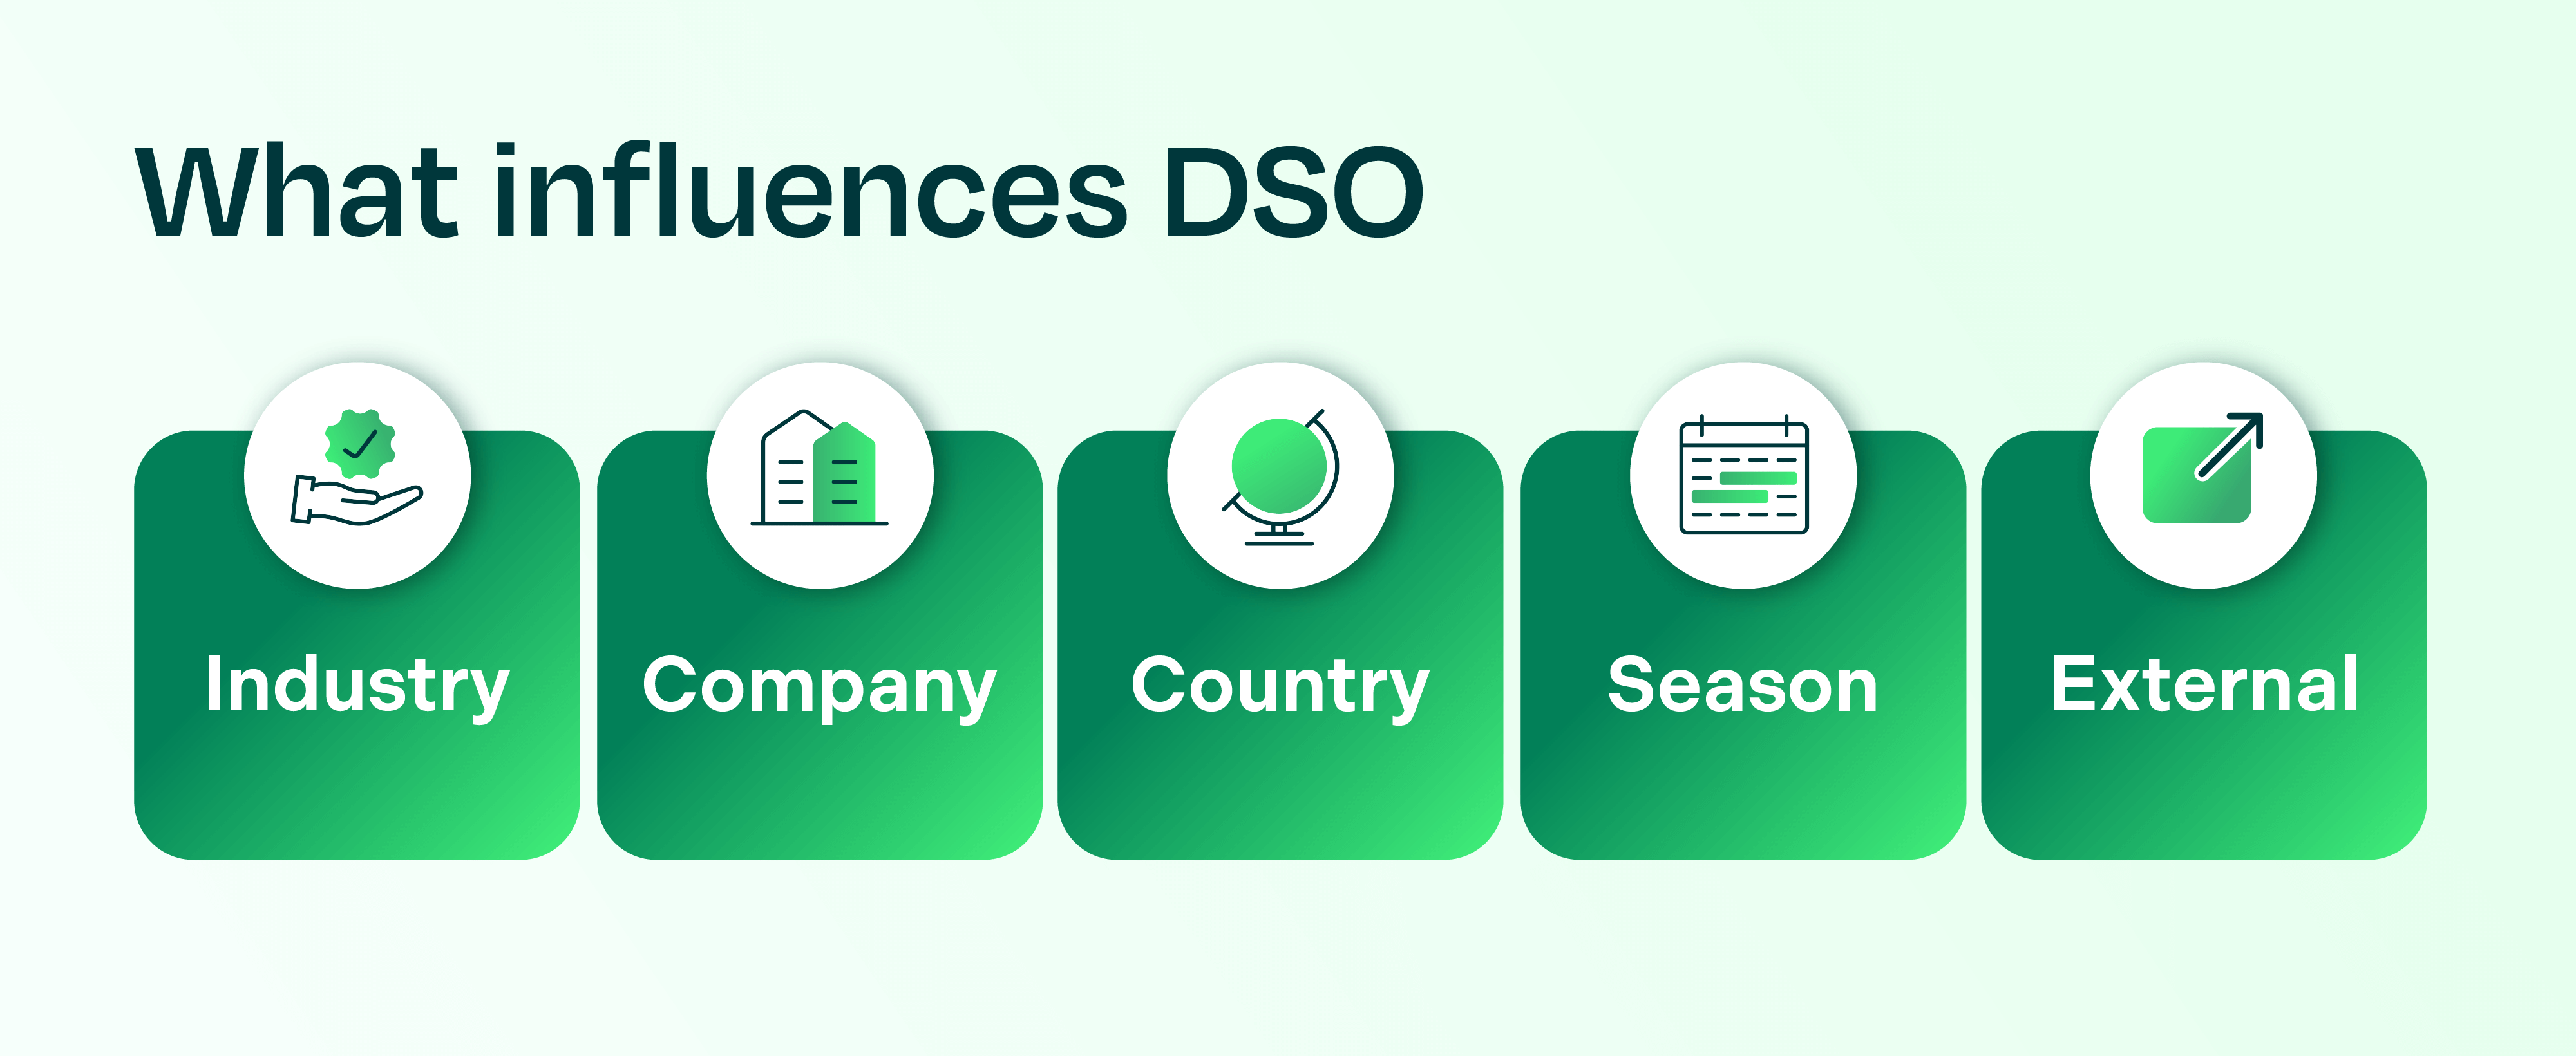 a list of what influences DSO